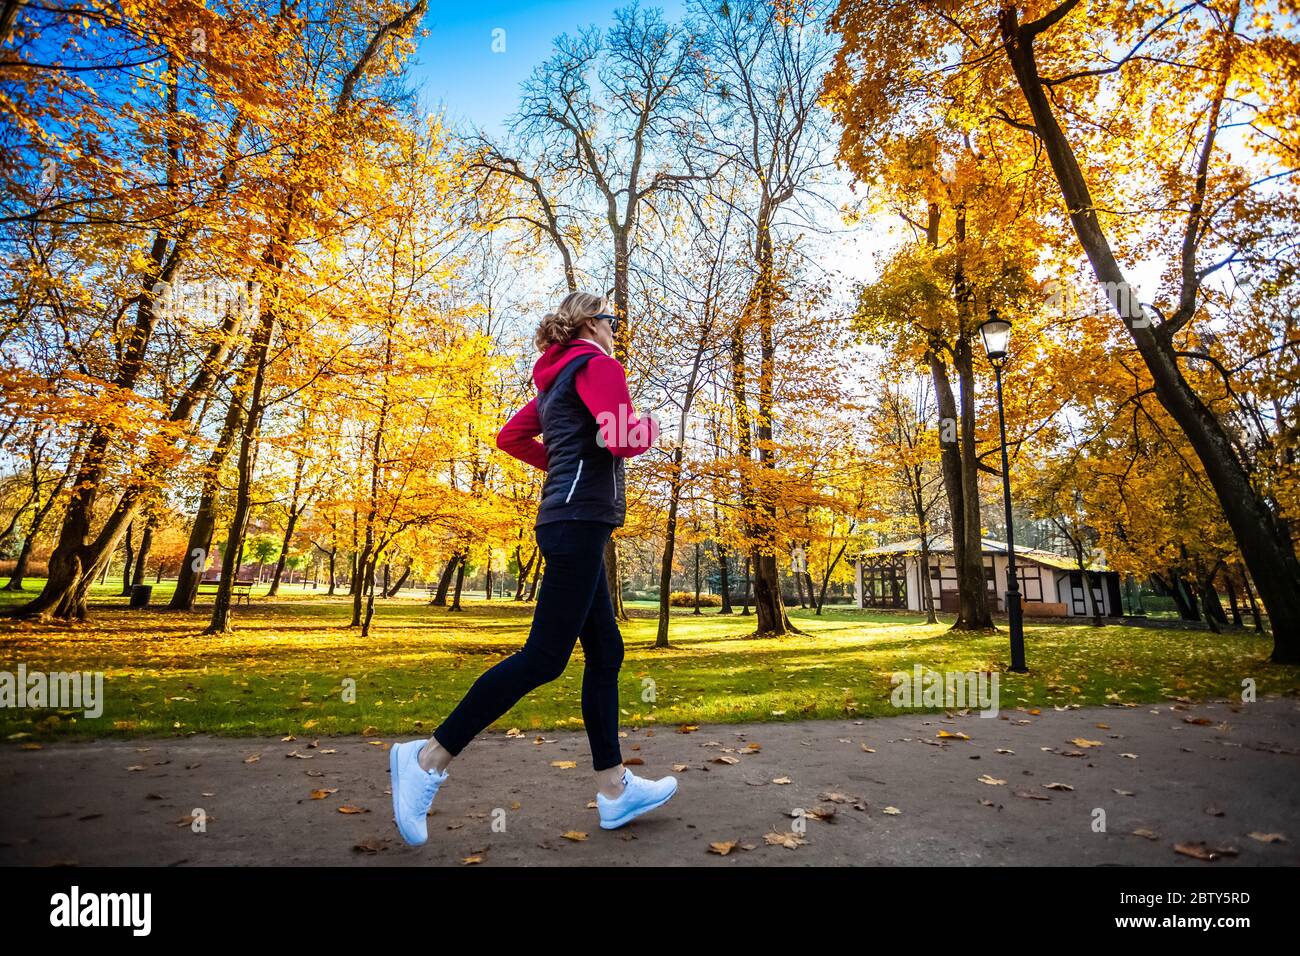 Healthy lifestyle - woman running in city park Stock Photo